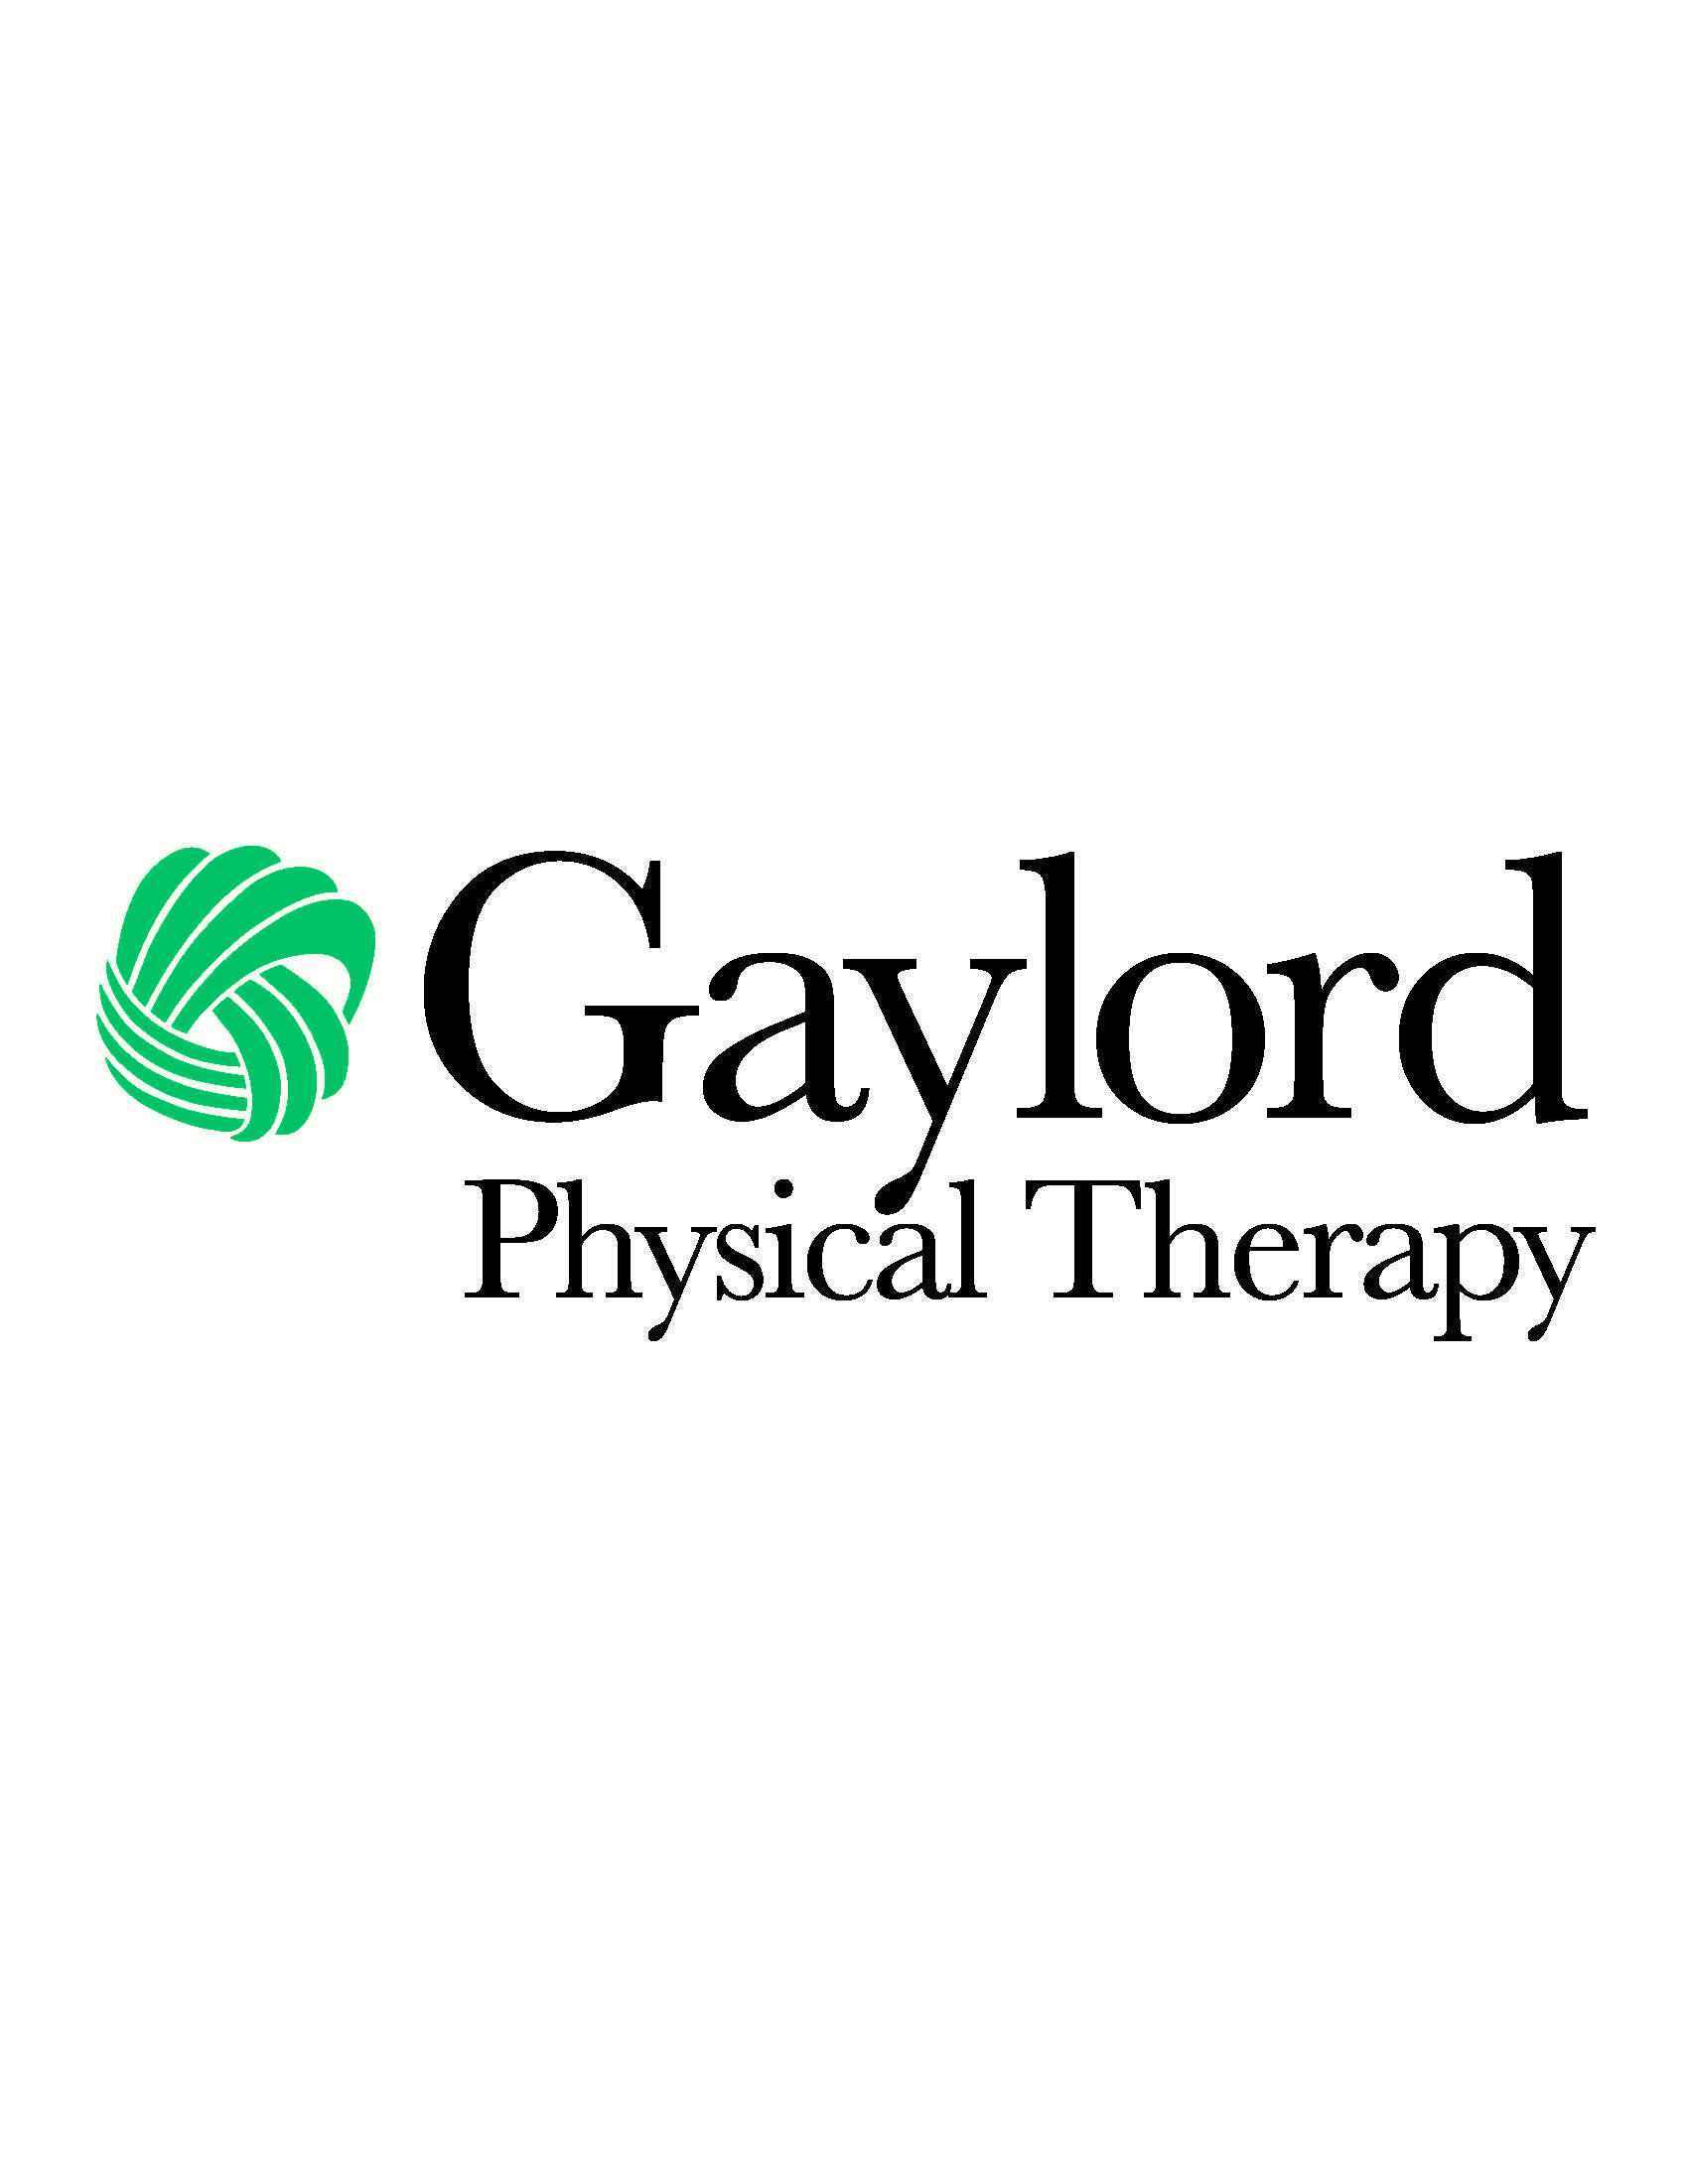 Therap Logo - gaylord physical therapy logo | Ion Bank Cheshire Road Races